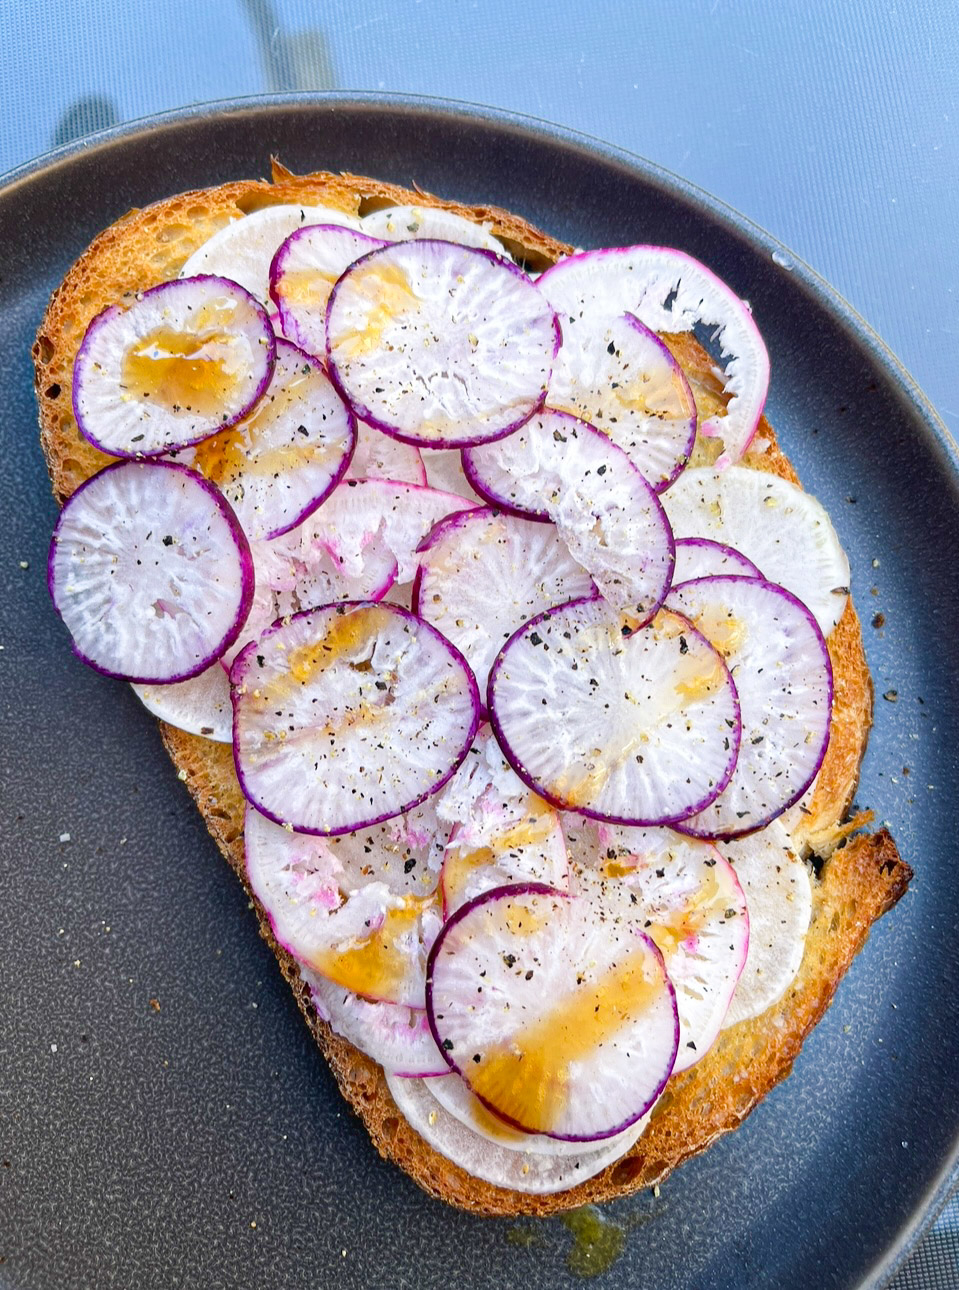 Toast topped with sliced radishes and a drizzle of hot honey on a plate